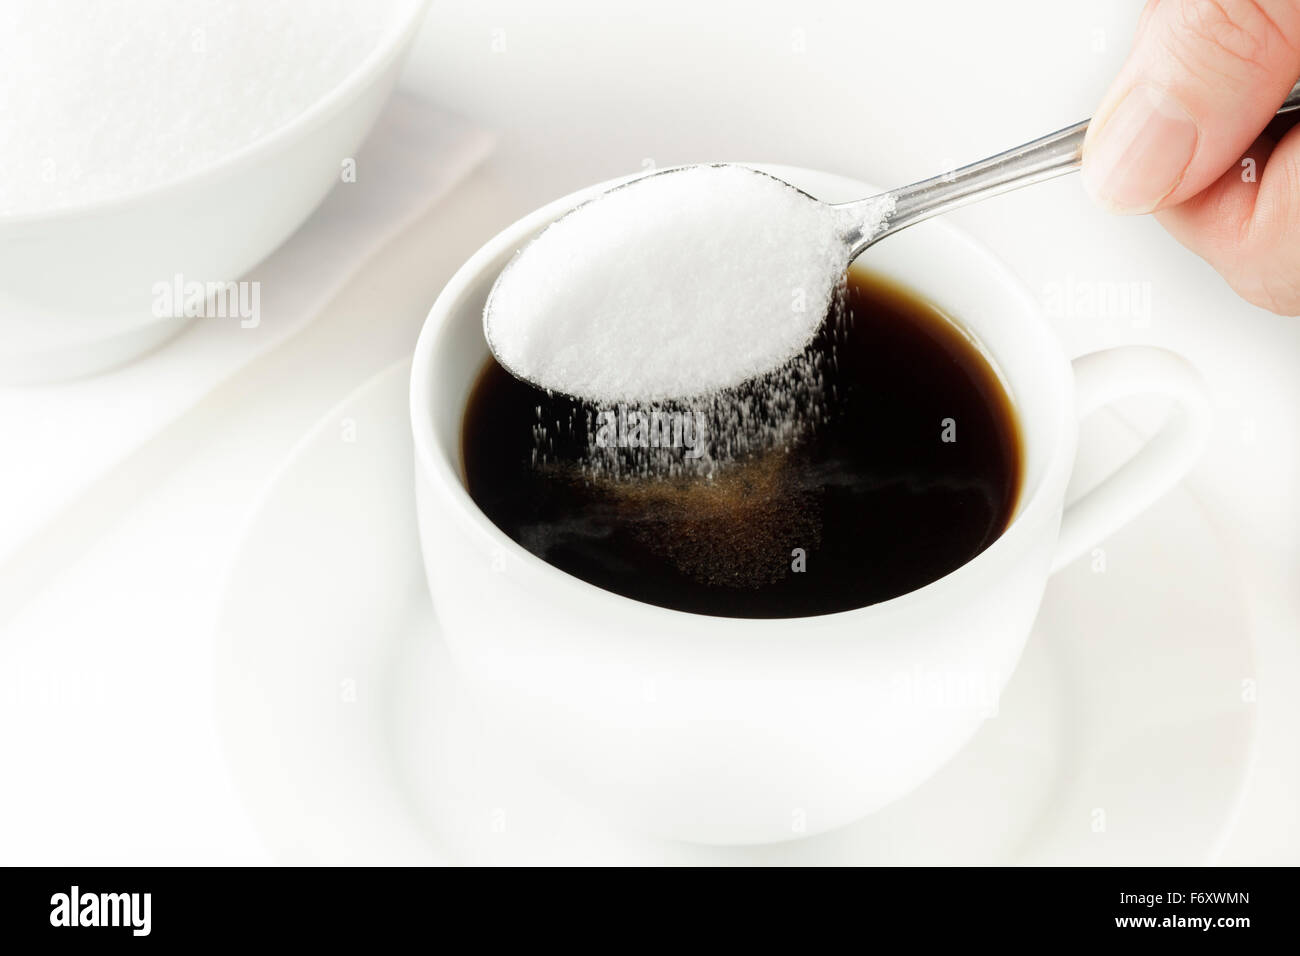 Spoon of sugar being poured into coffee cup Stock Photo